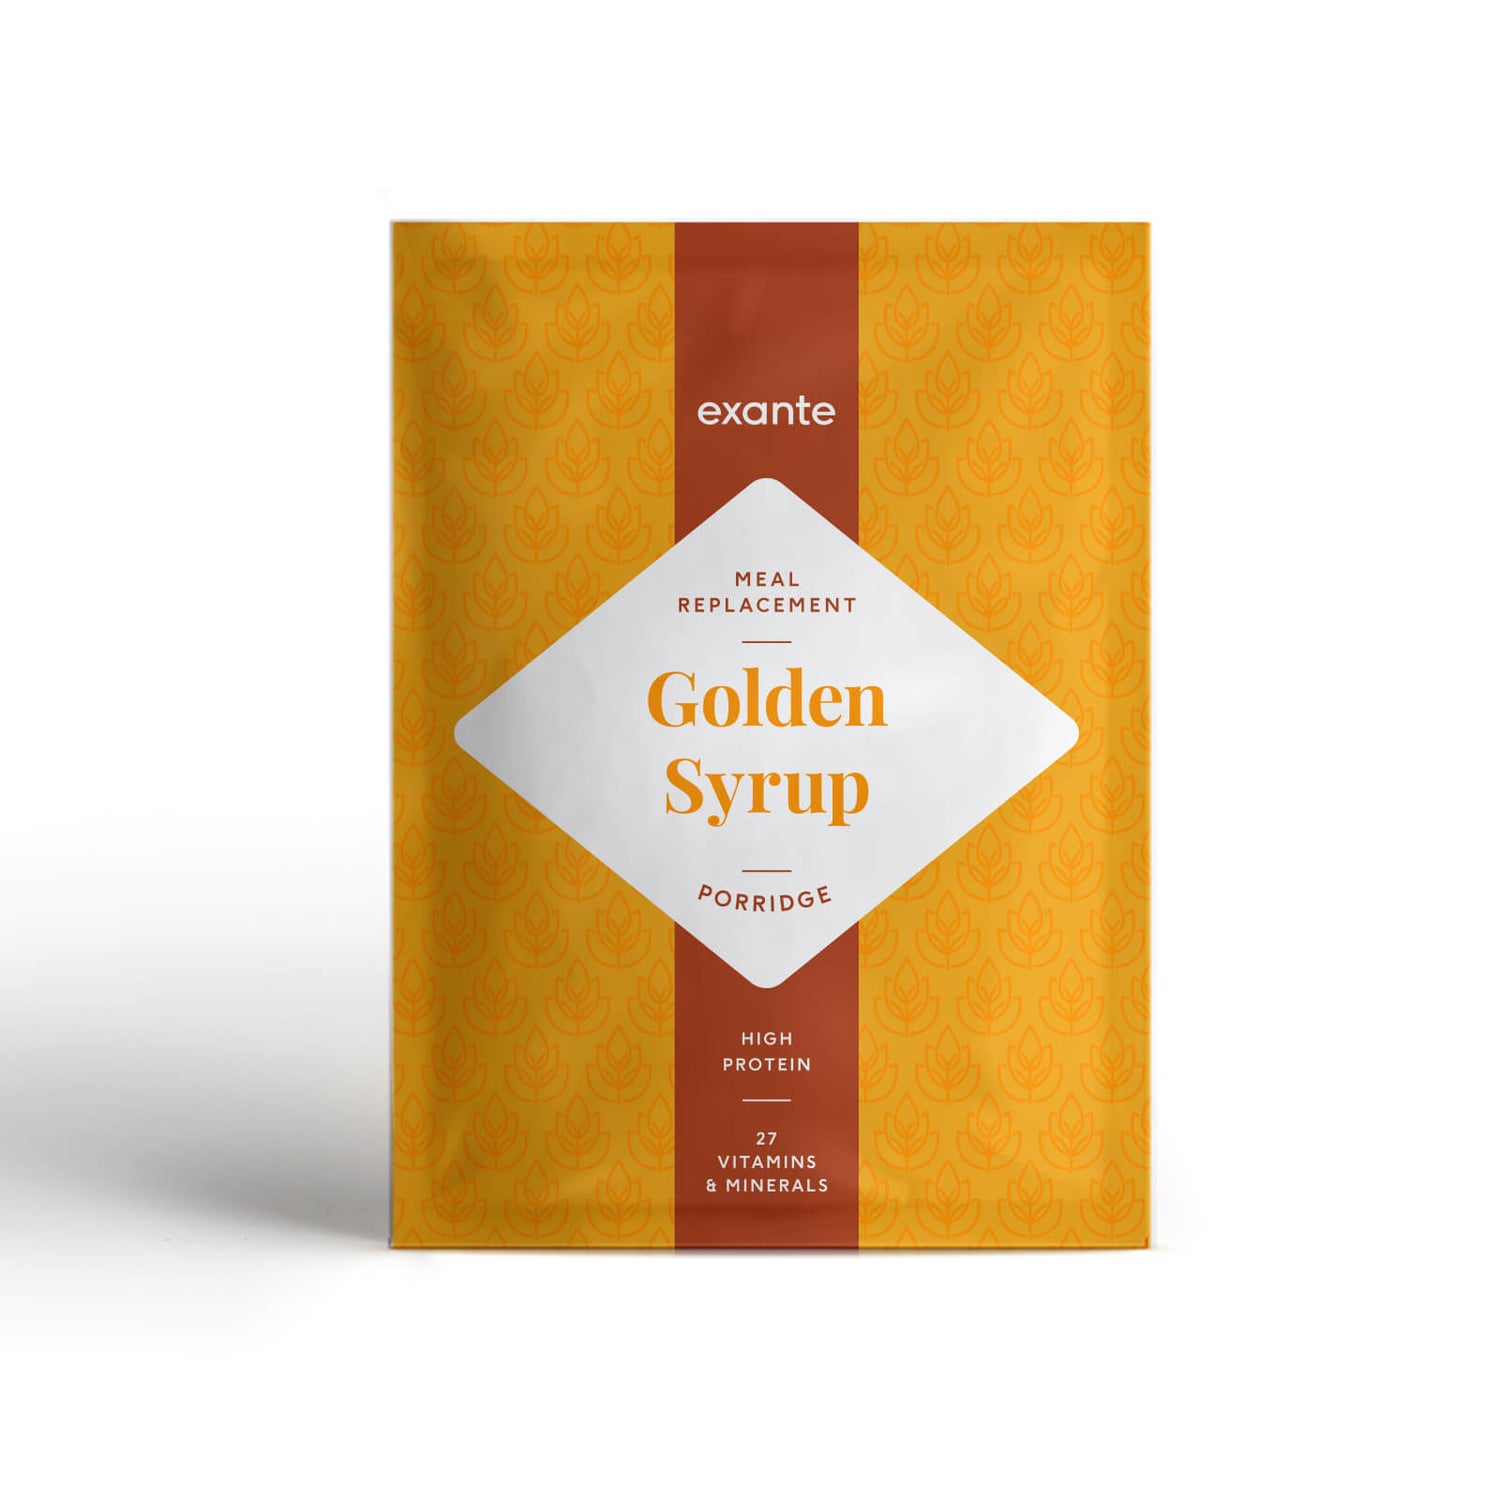 Meal Replacement Golden Syrup Porridge